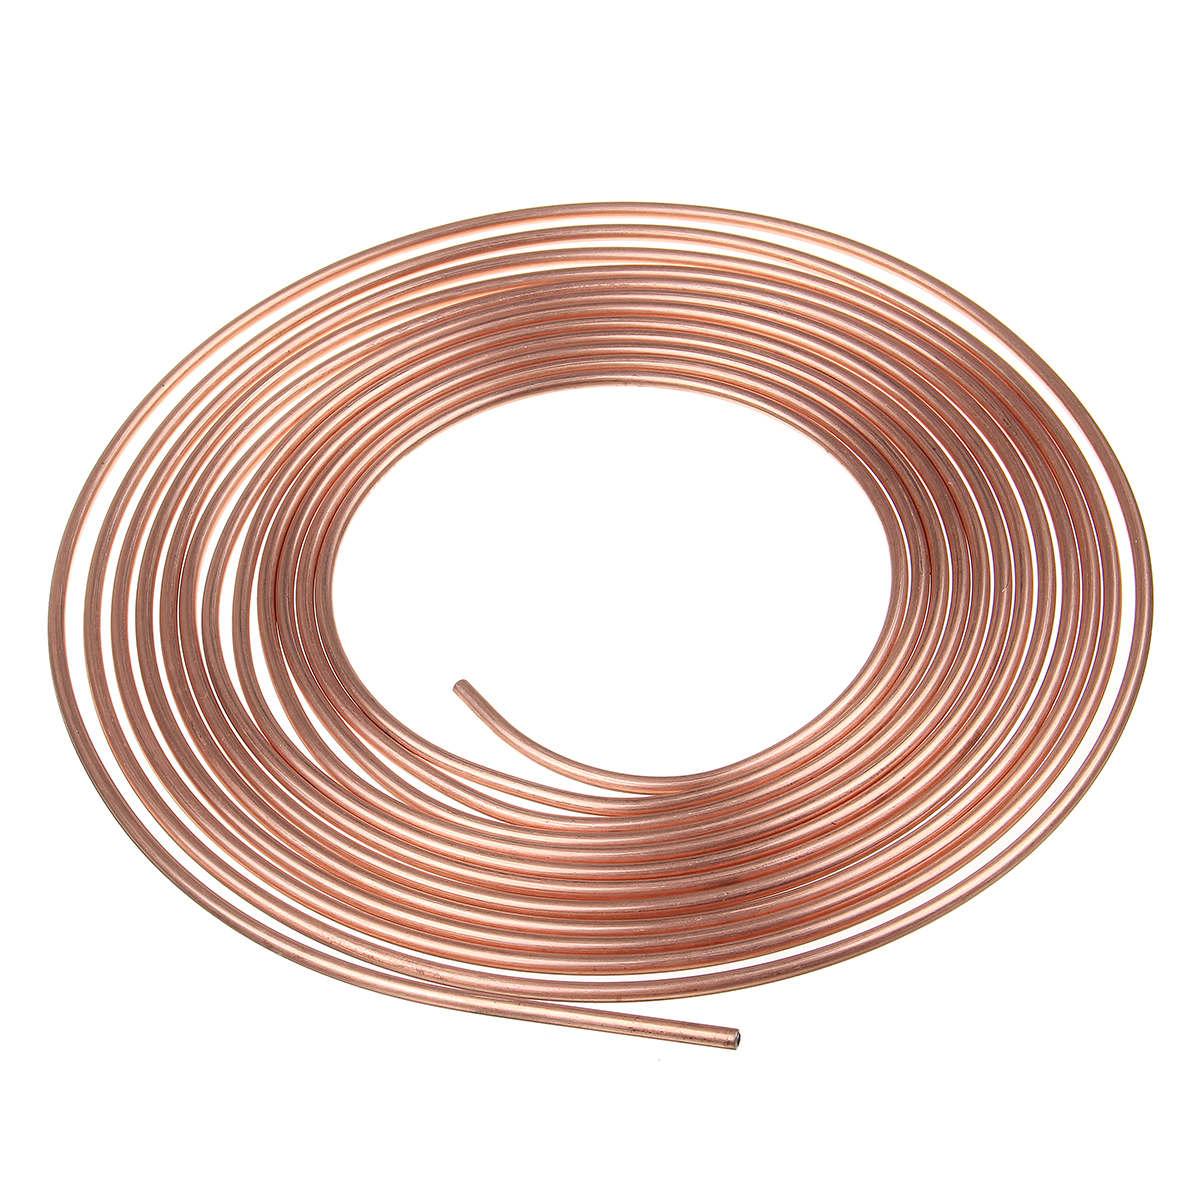 Roll-Copper-Steel-25-ft-316quot-Brake-Line-Pipe-Tubing-with-20-Pcs-Kit-Fittings-Brake-Female-Male-Nu-1543212-5